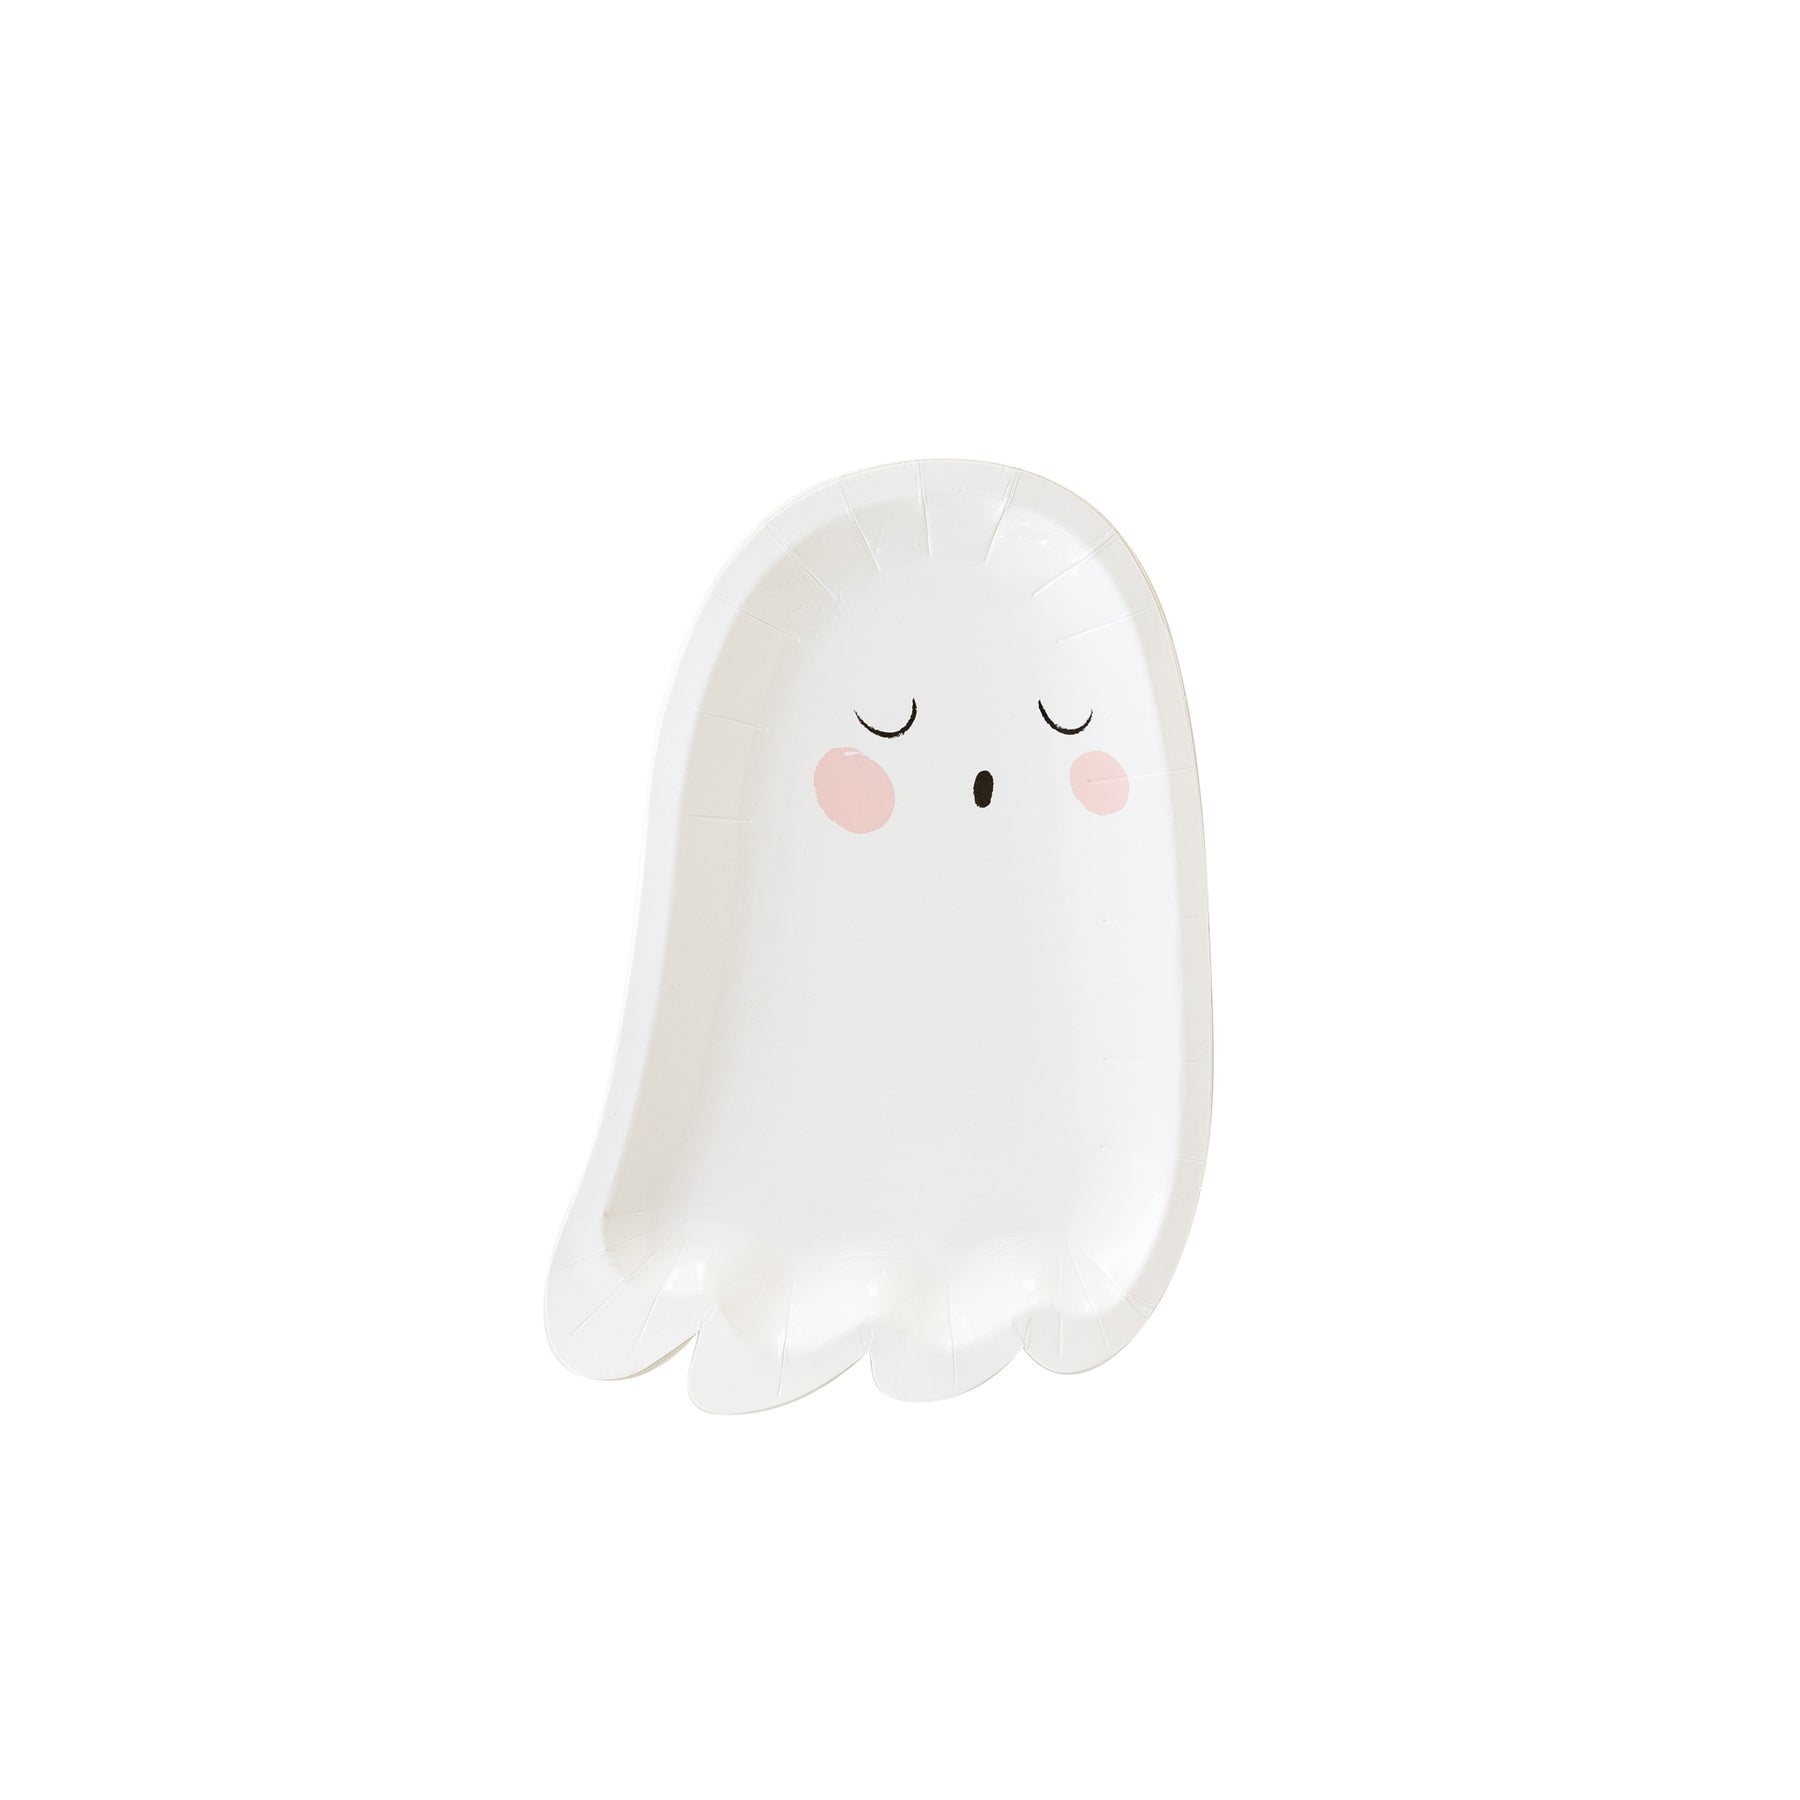 Trick or Treat Ghost Shaped 9'' Plate